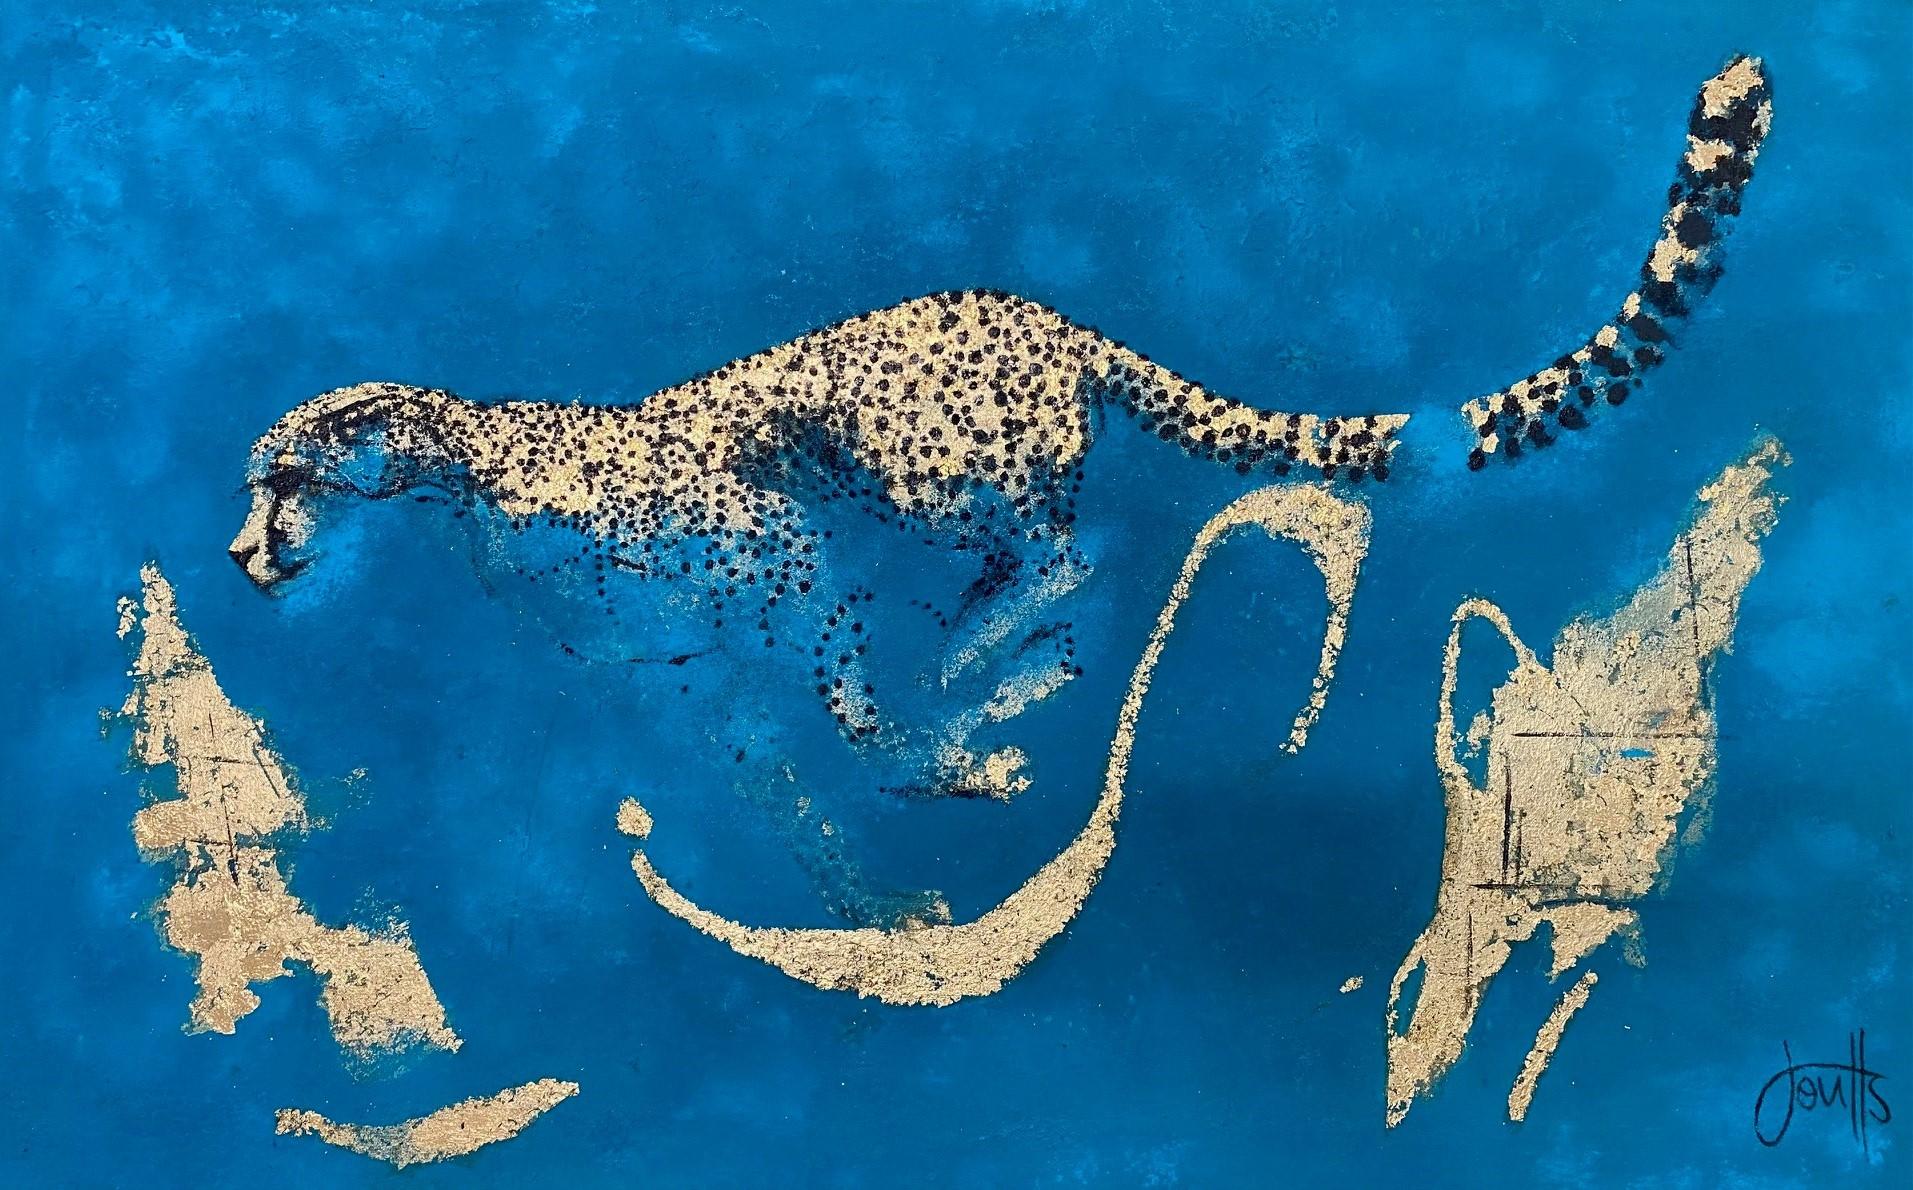 Dancing Through The Koppies by Jan Coutts. A striking creation with mixed media including gold Leaf & Cobalt Turquoise Pigment - it depicts one of Coutts's most treasured subjects to paint - the Cheetah. Appearing in an alert manner as it passes